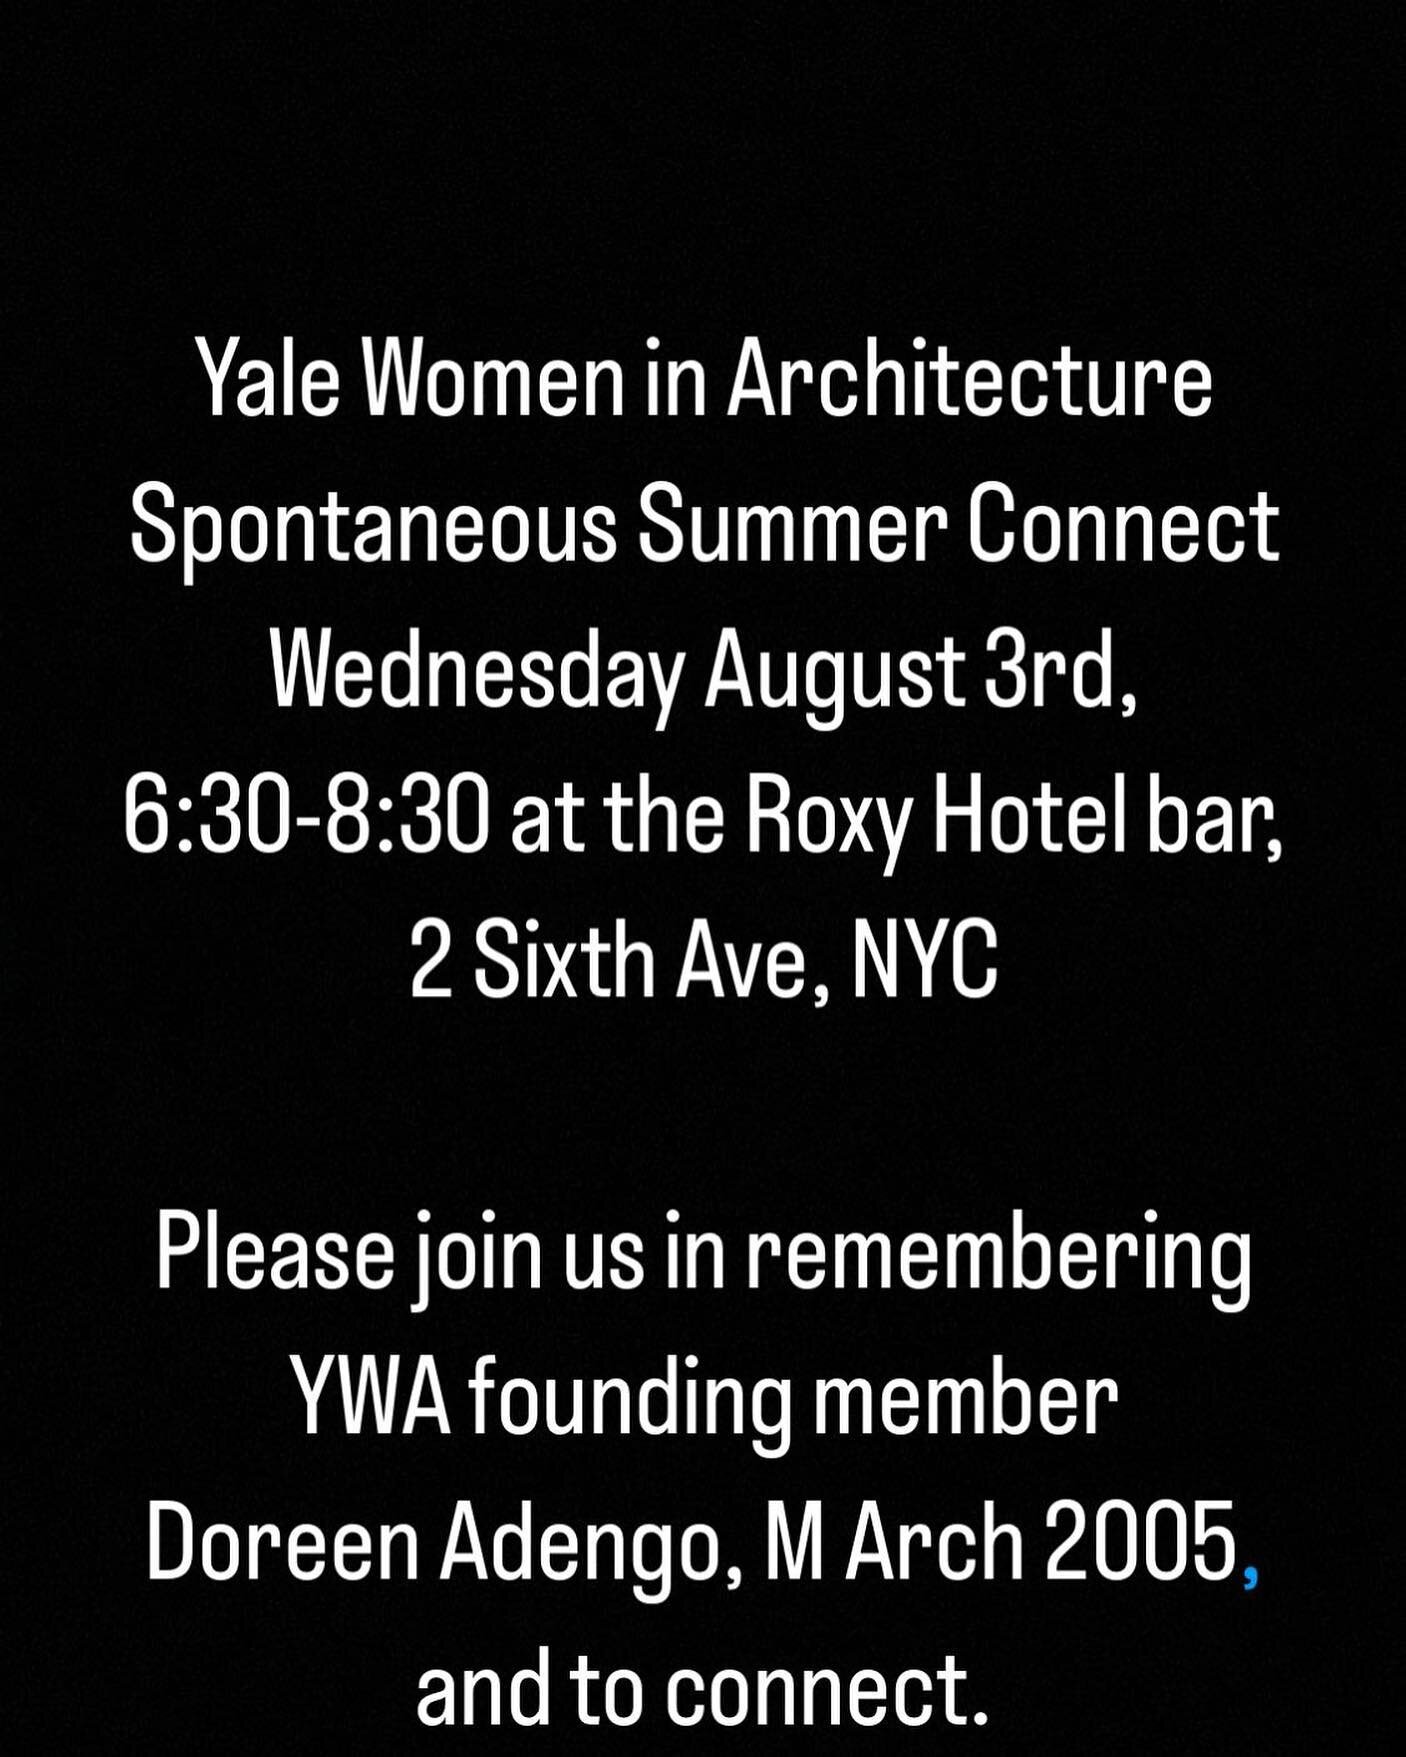 Please join us this week to remember our friend and colleague Doreen Adengo.